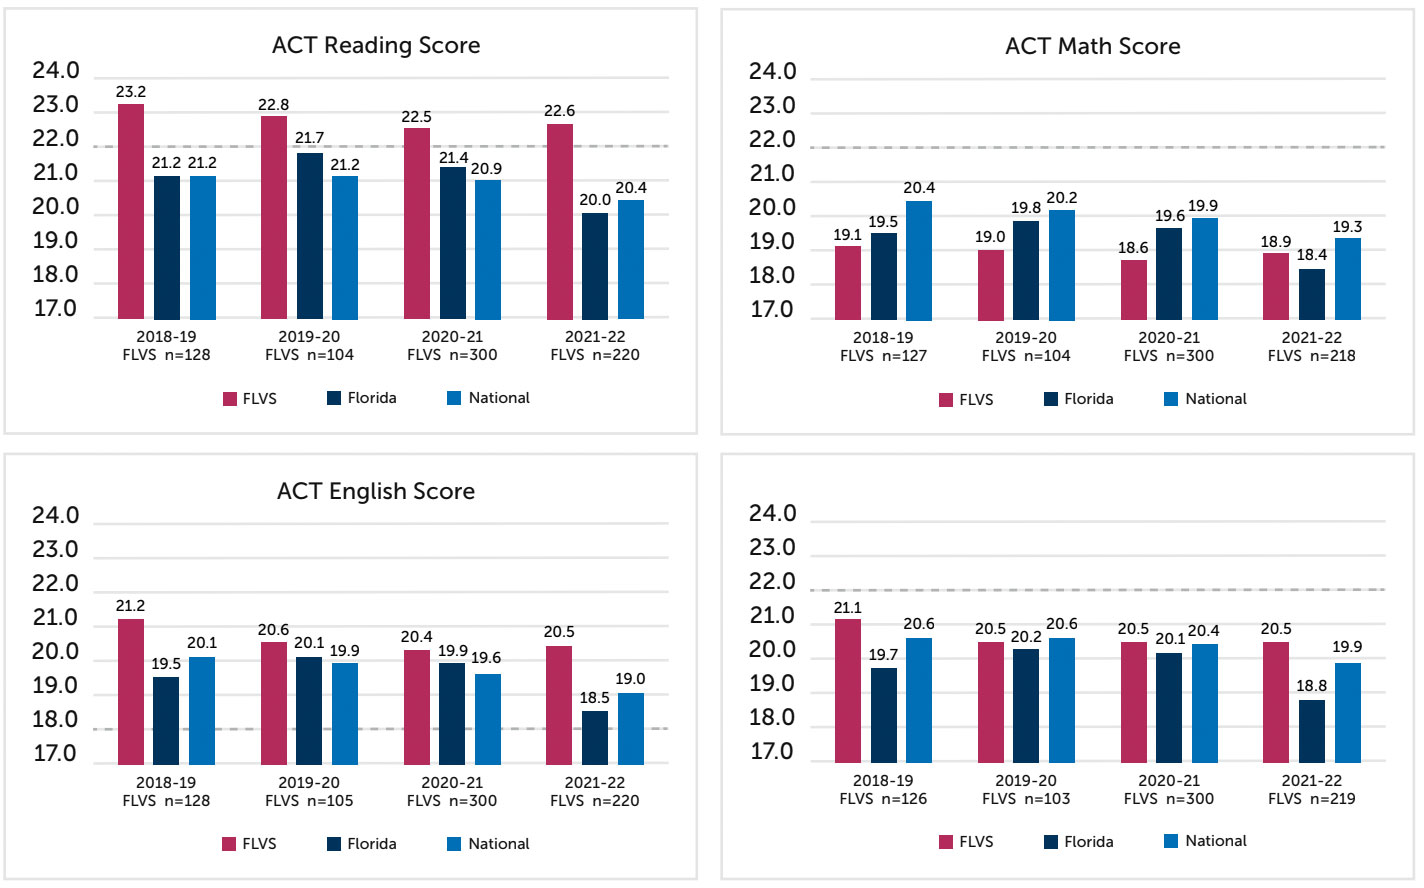 Bar chart showing ACT scores